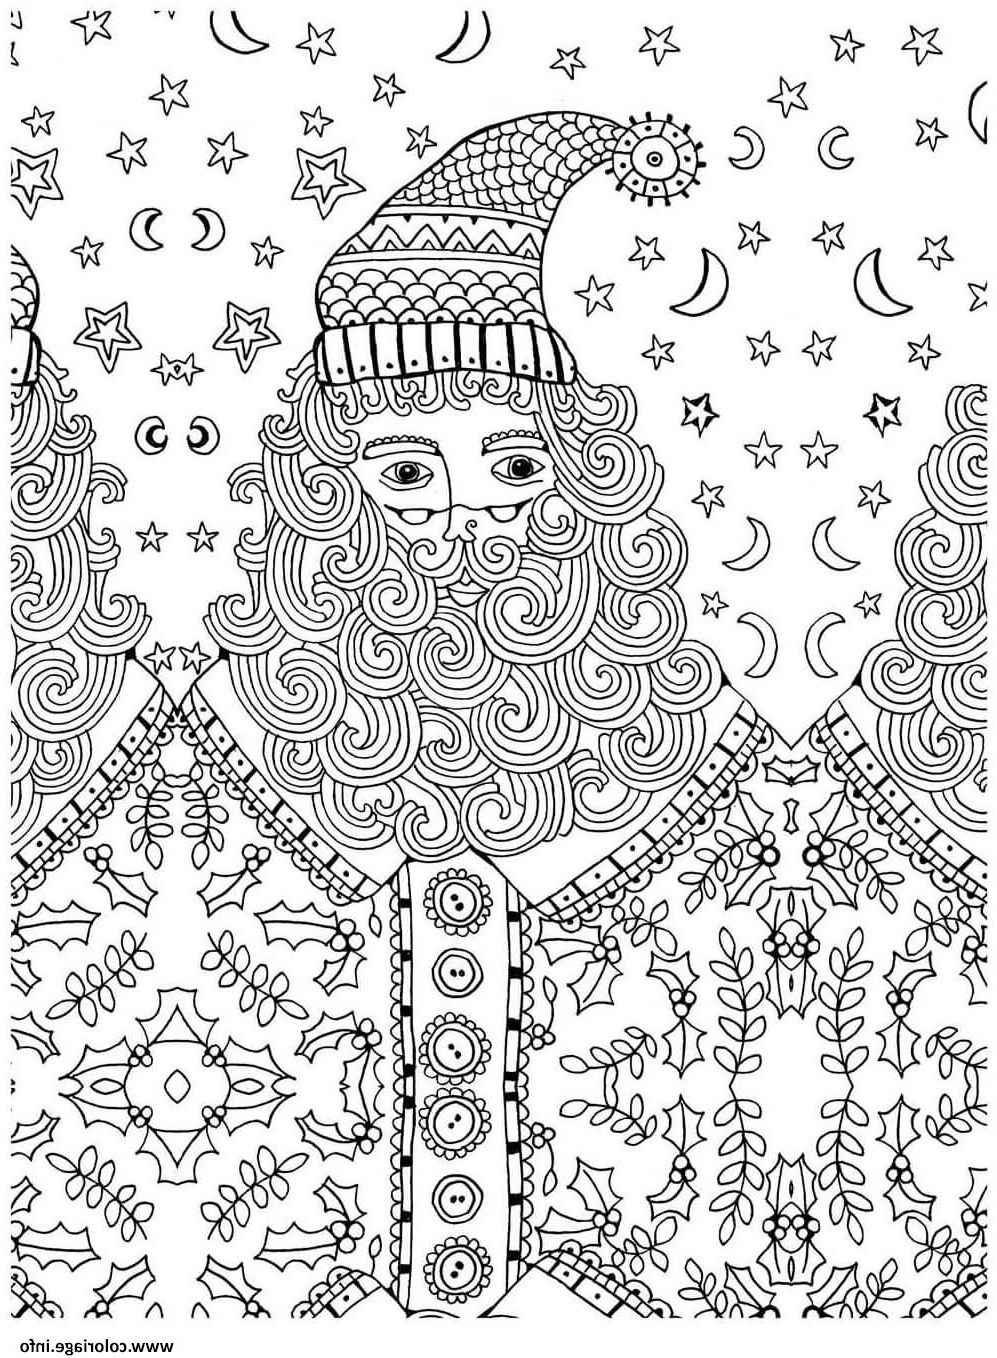 Coloriage Adulte Noel Cool Collection Coloriage Anti Stress Noel